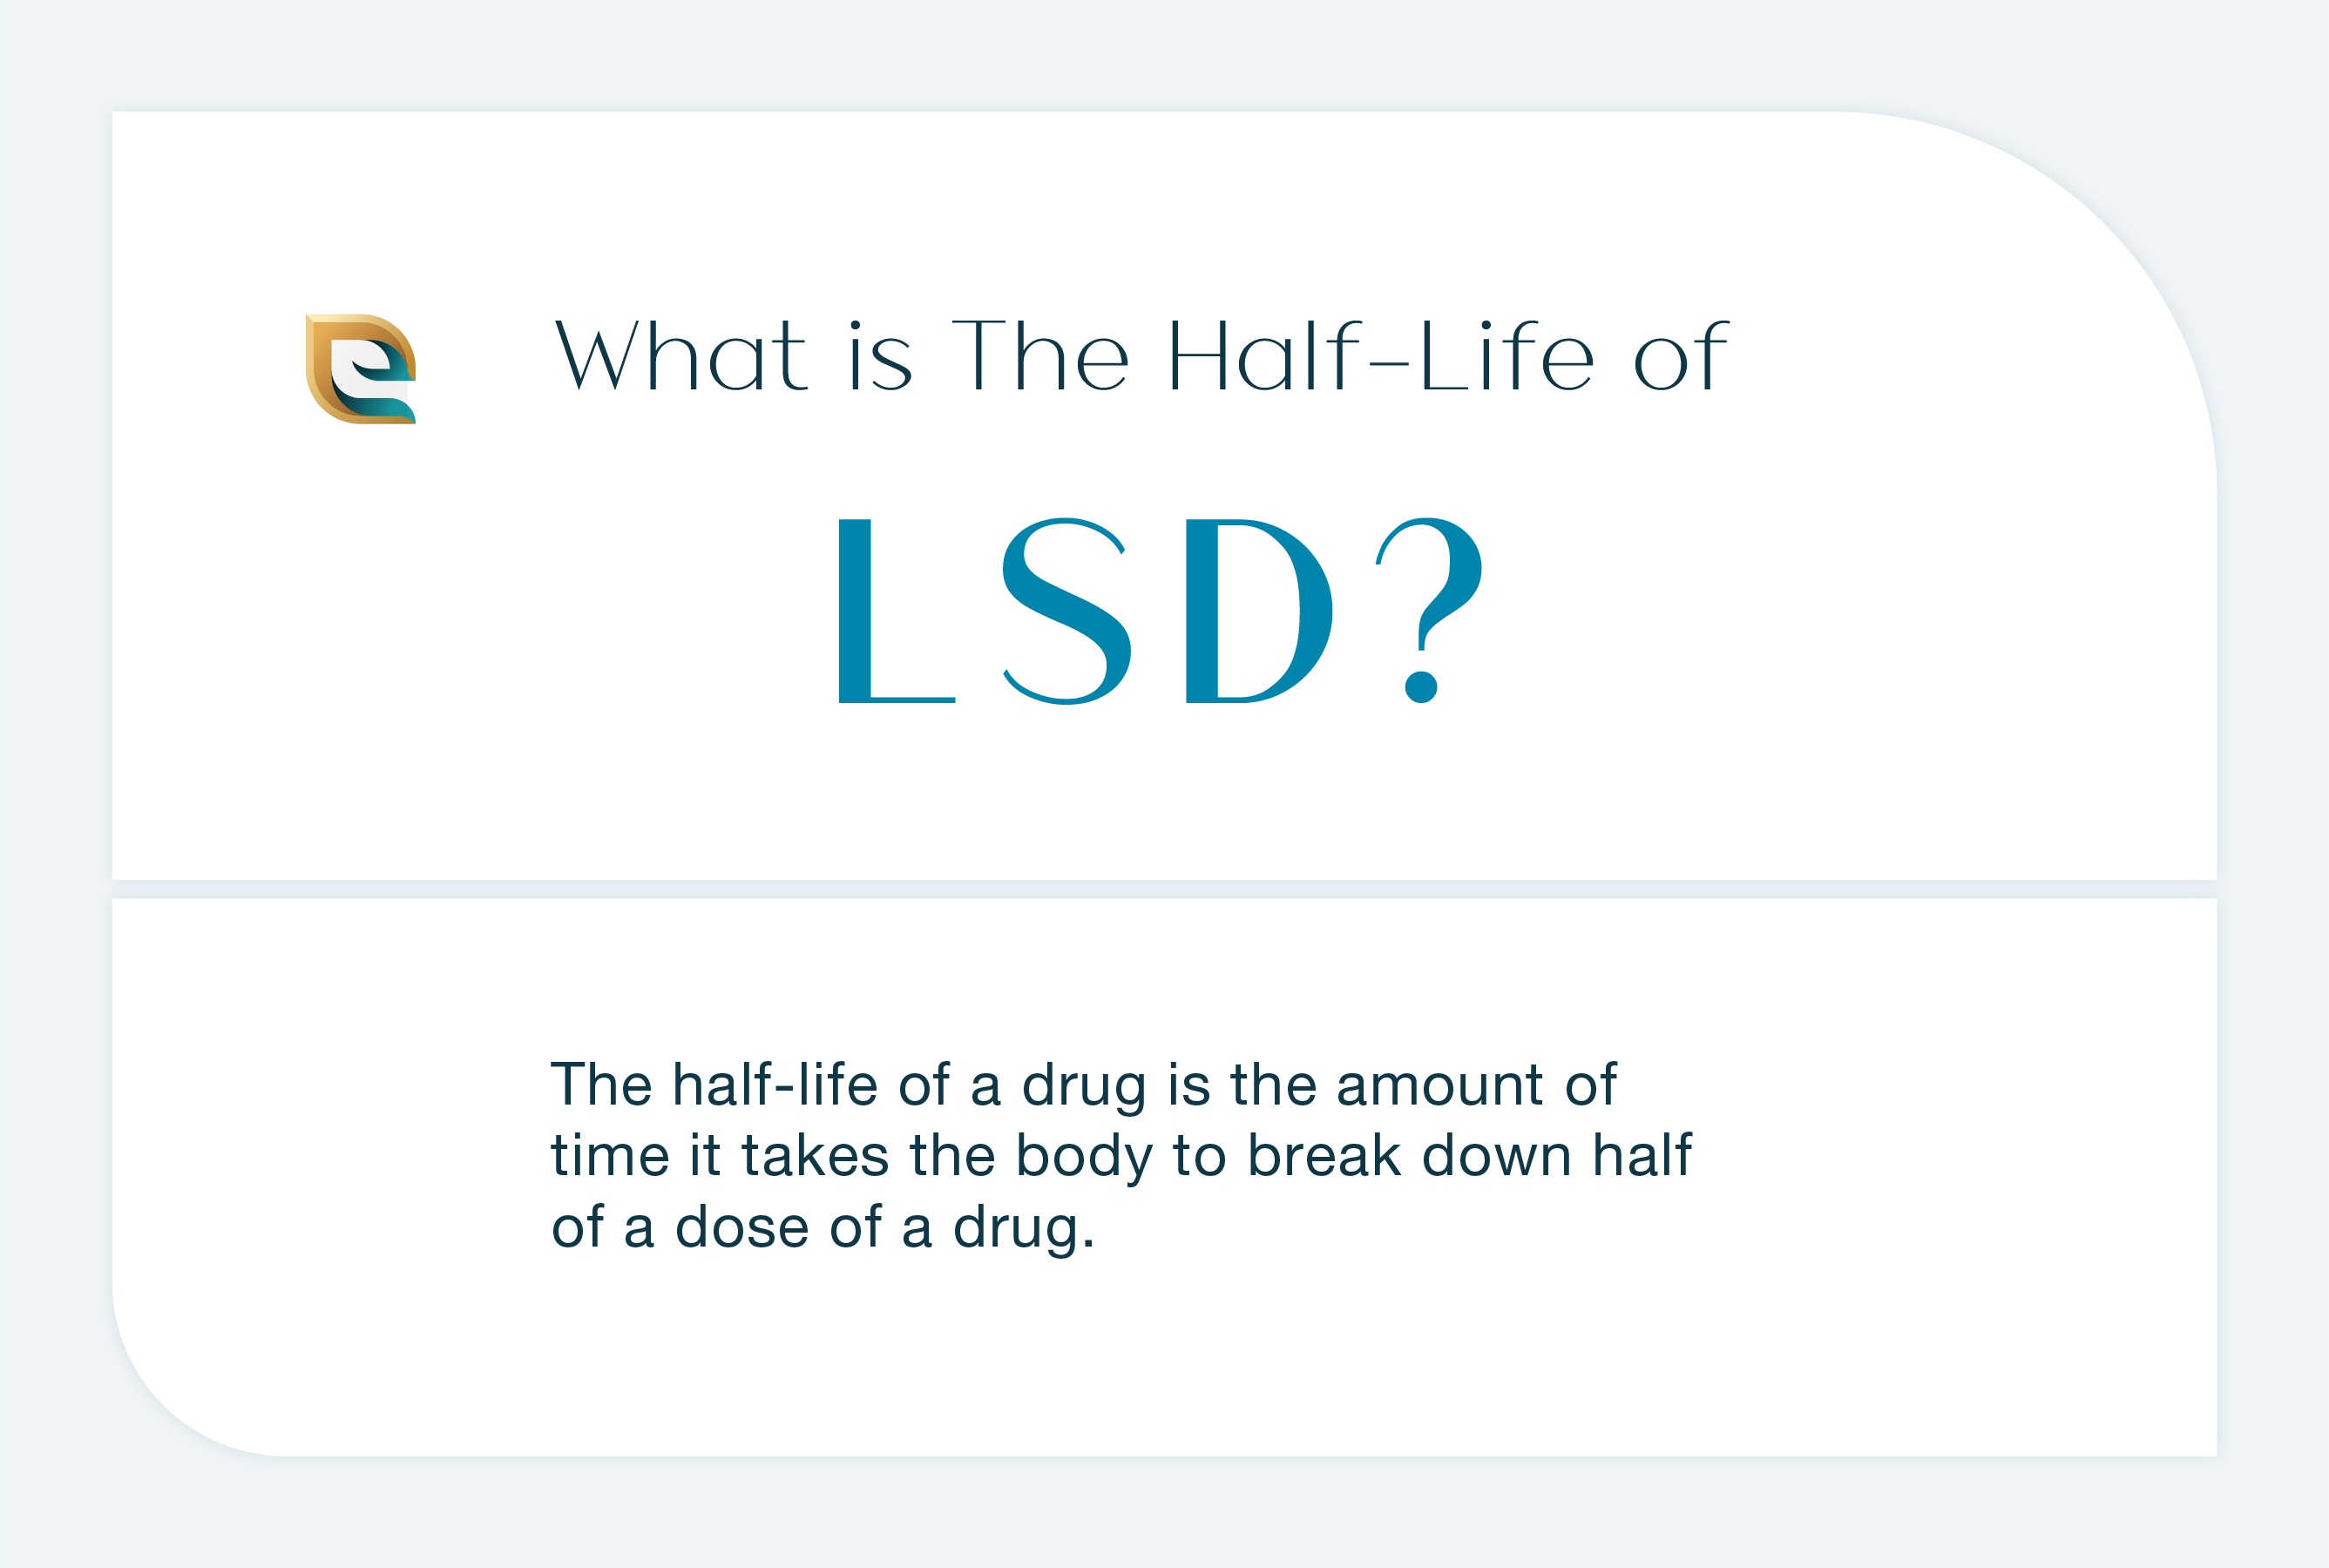 What is half half of LSD? This image describes the half life of LSD